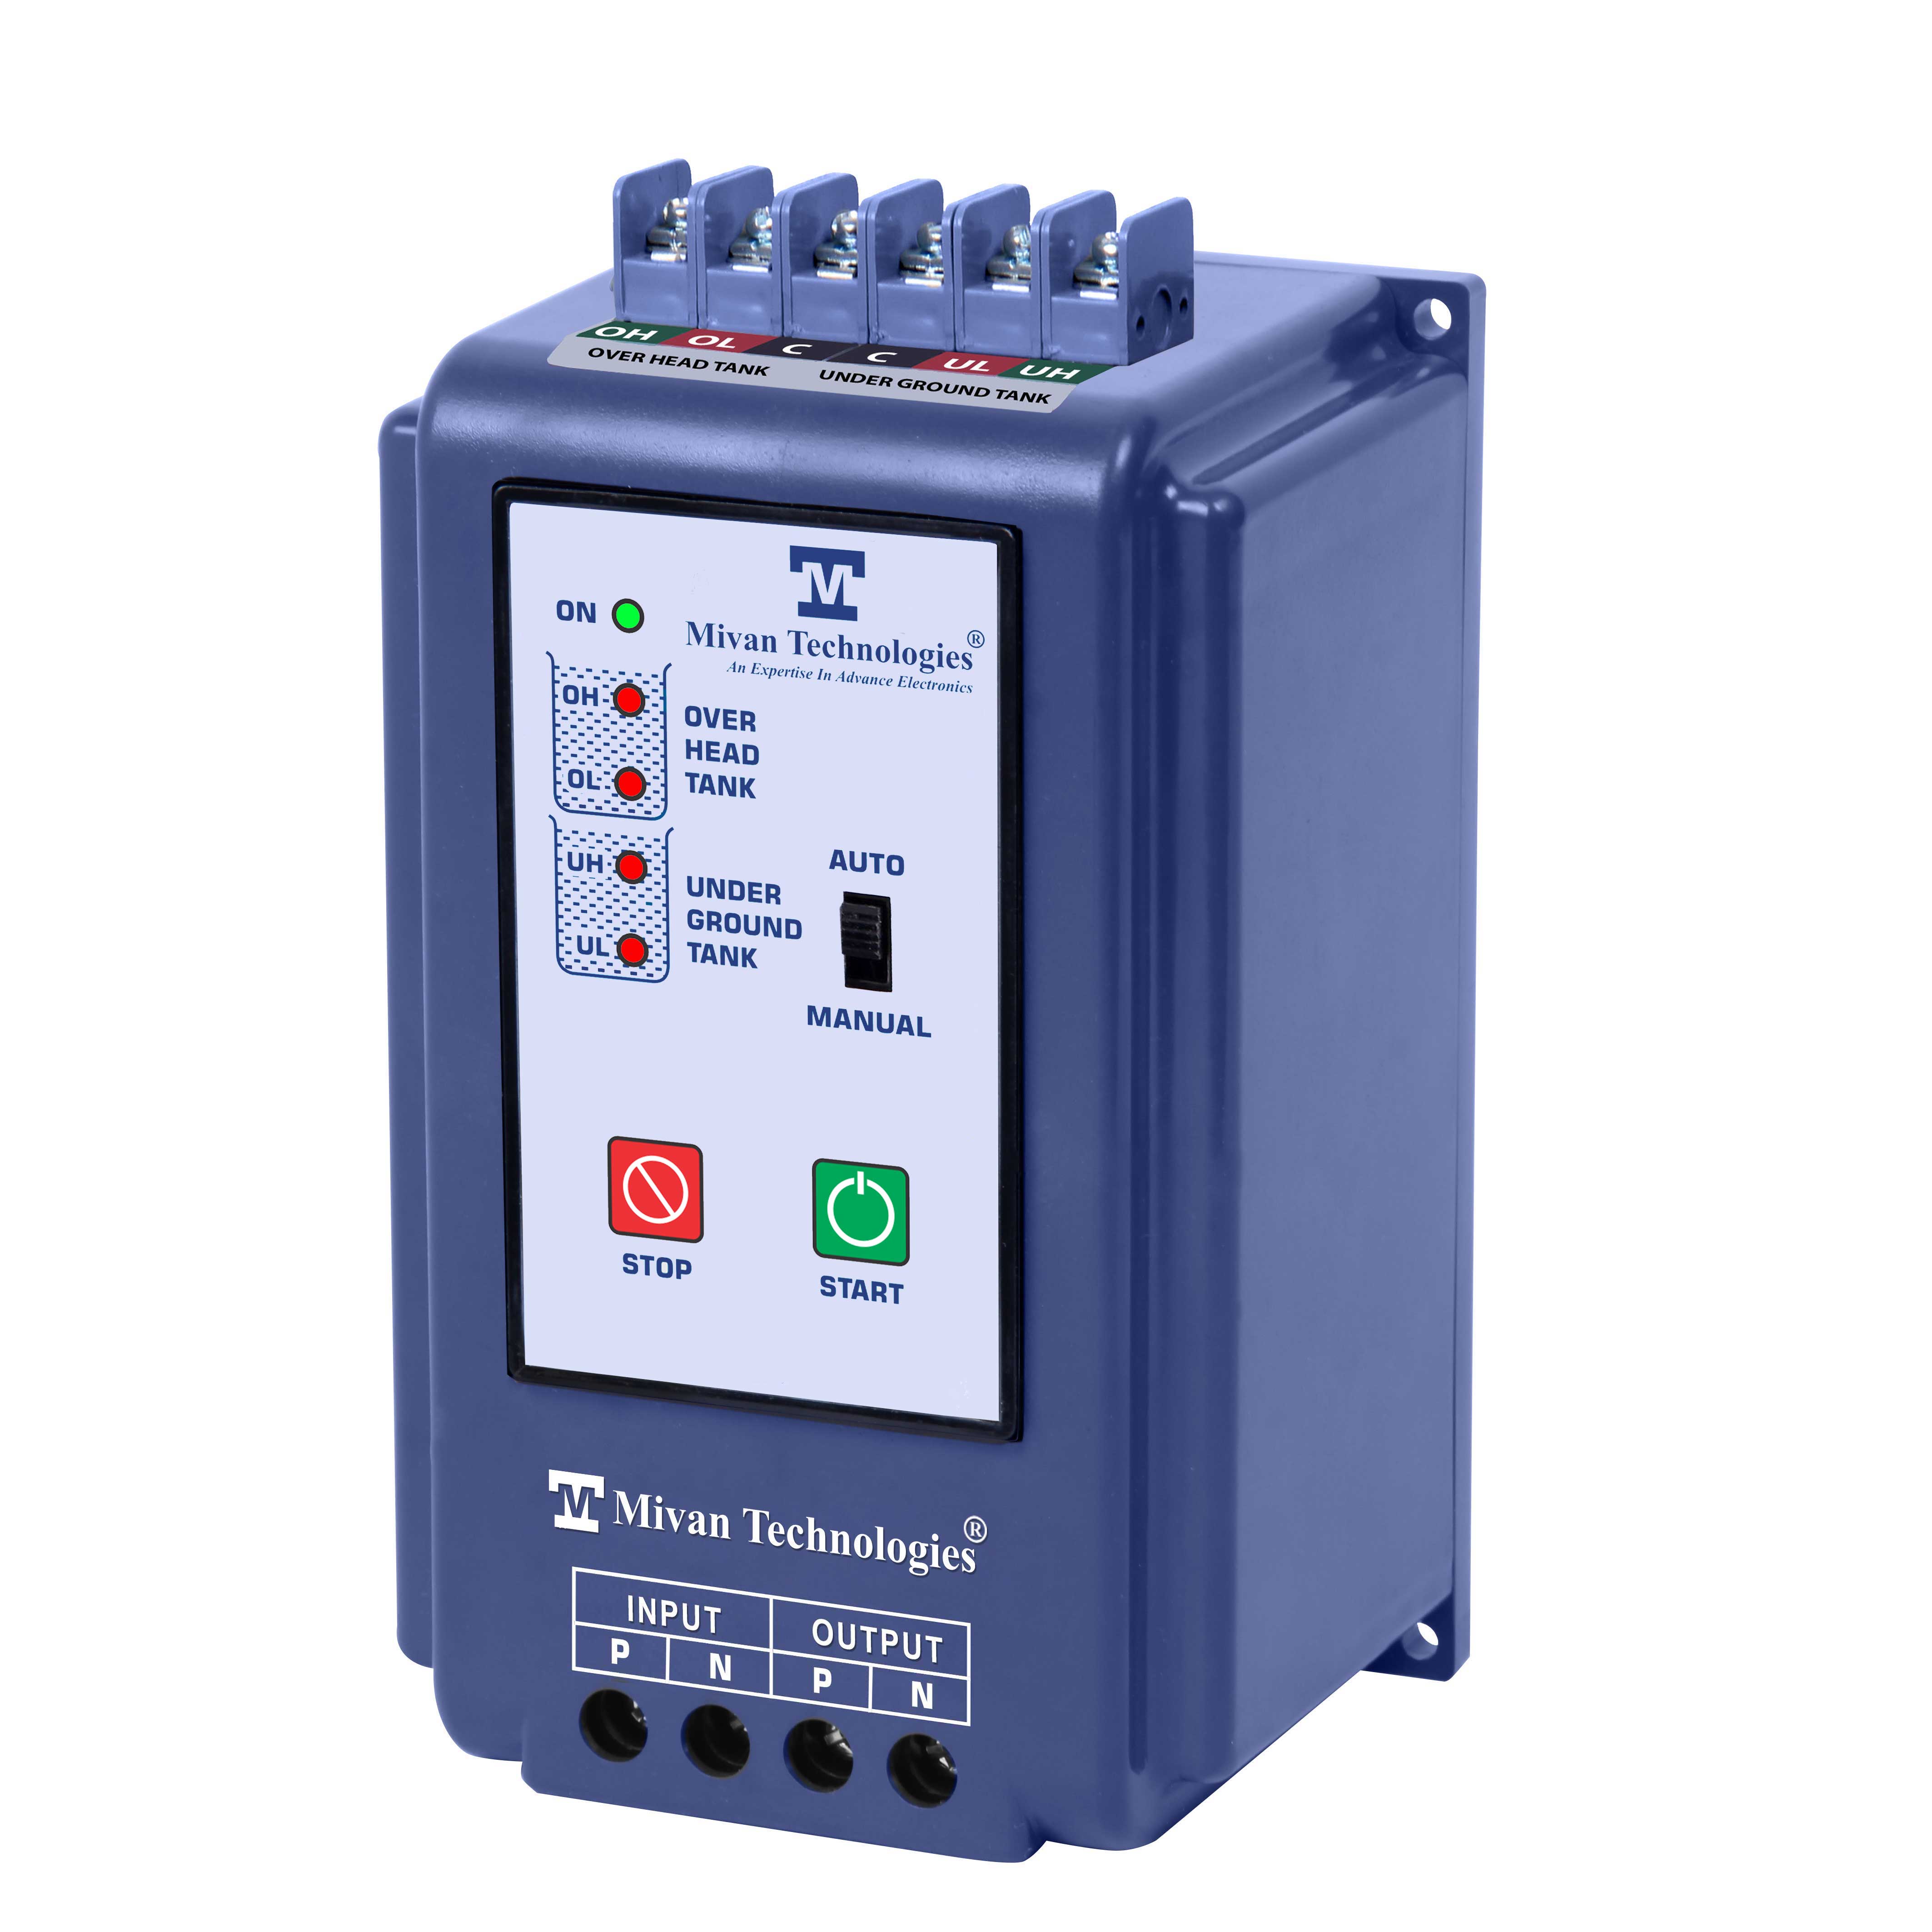 LLC 1 ABS HD Fully Automatic Water Level Controller and Indicators For Up and Down Tank With 6 Sensors Suitable For Motor Up to 5Hp Supply 230 VAC